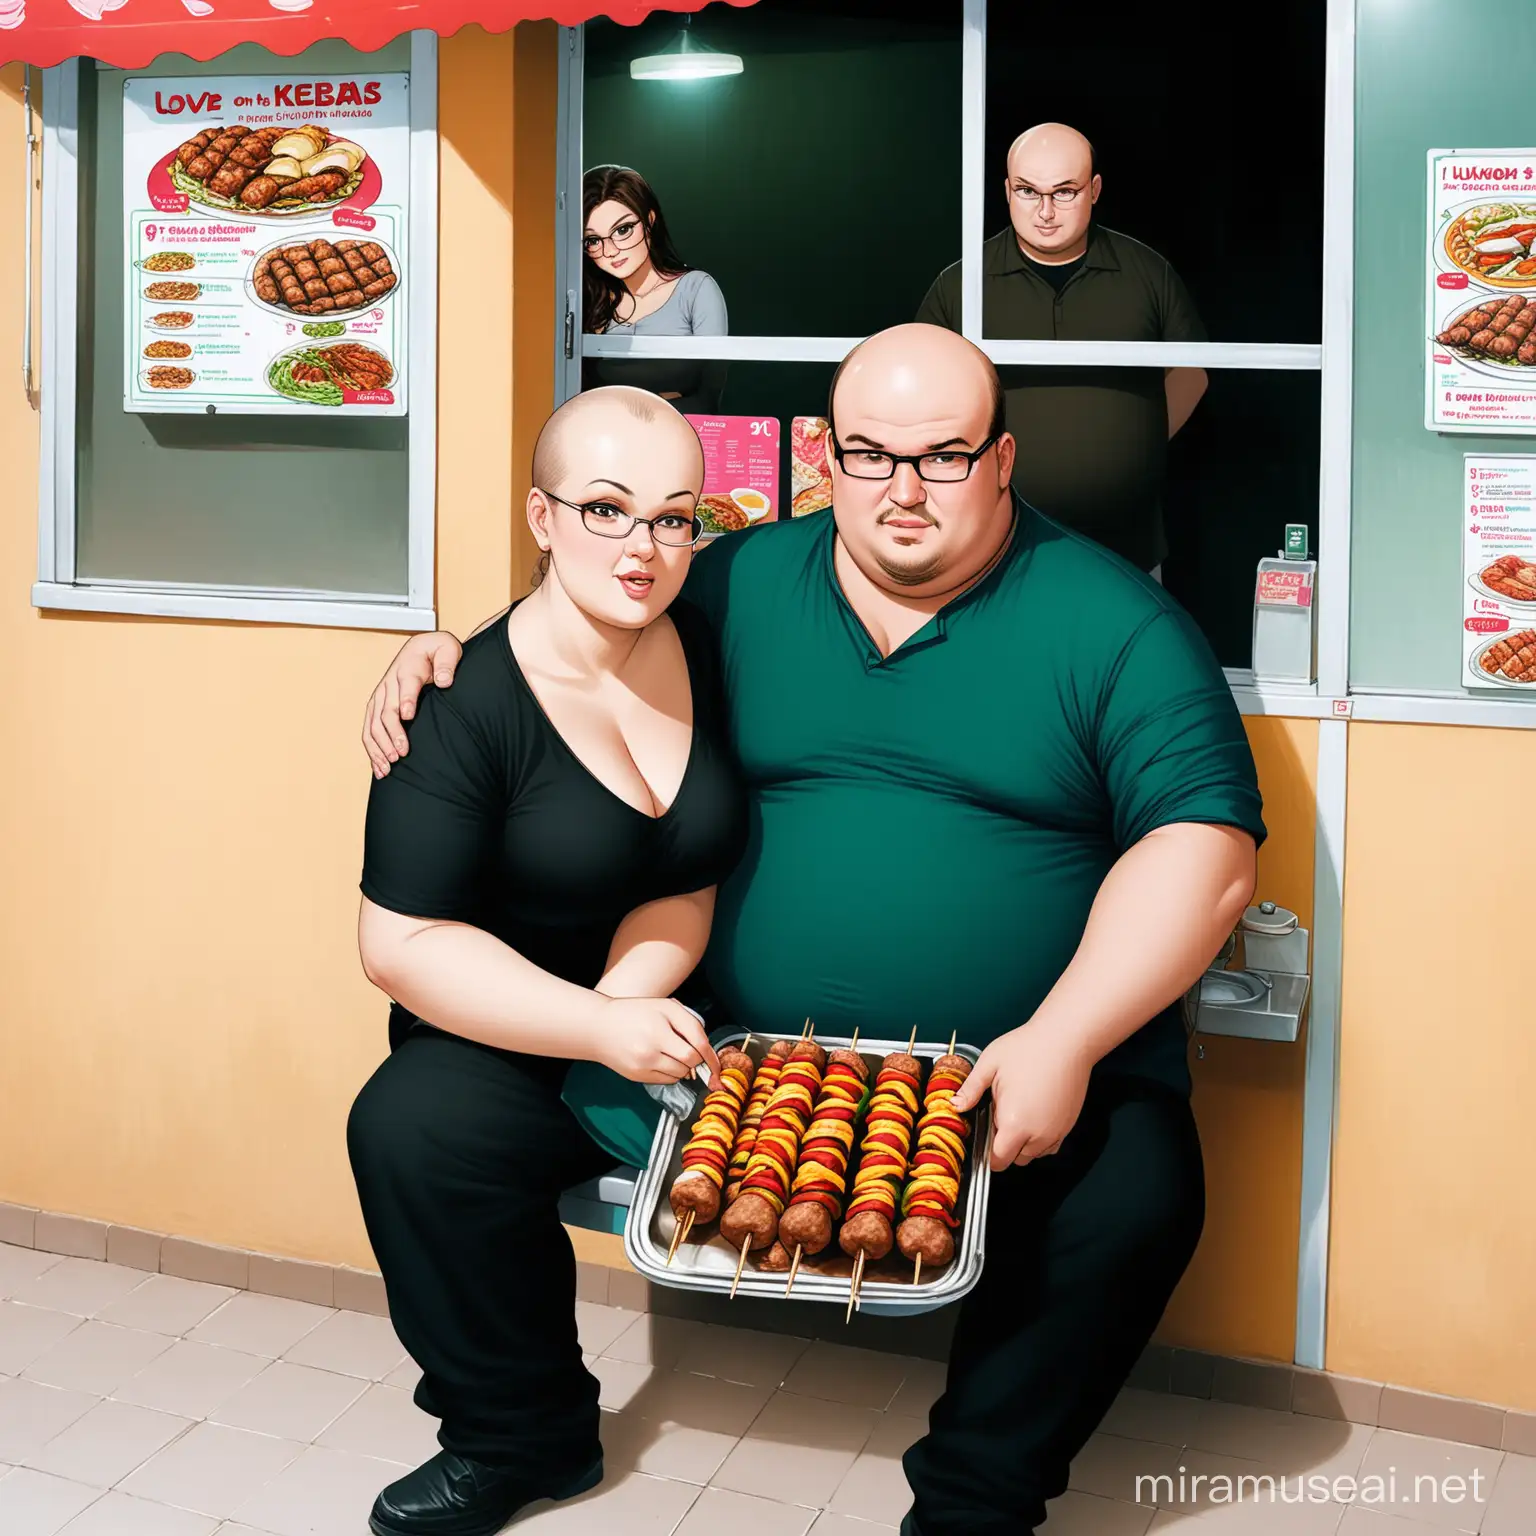 balding, overweight slavic man with glasses, selling kebabs at Luko's Kebabs which is a roadside shop, sitting on toilet whilst attending a date  with a woman for the tv show "Love on the Spectrum''